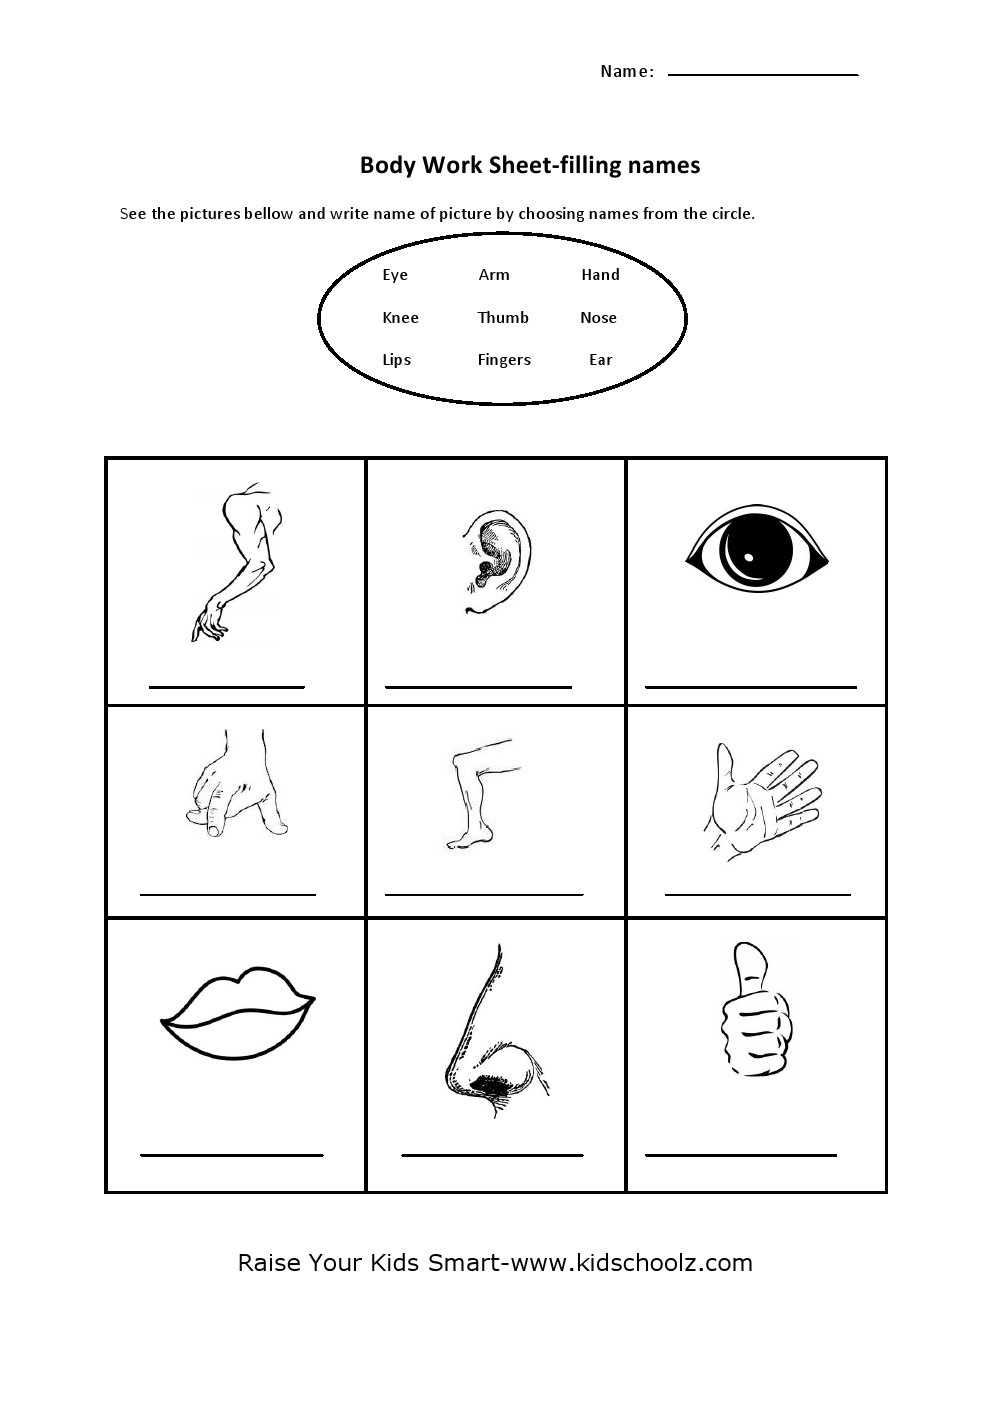 10-best-images-of-custom-name-tracing-worksheets-name-body-parts-worksheet-custom-name